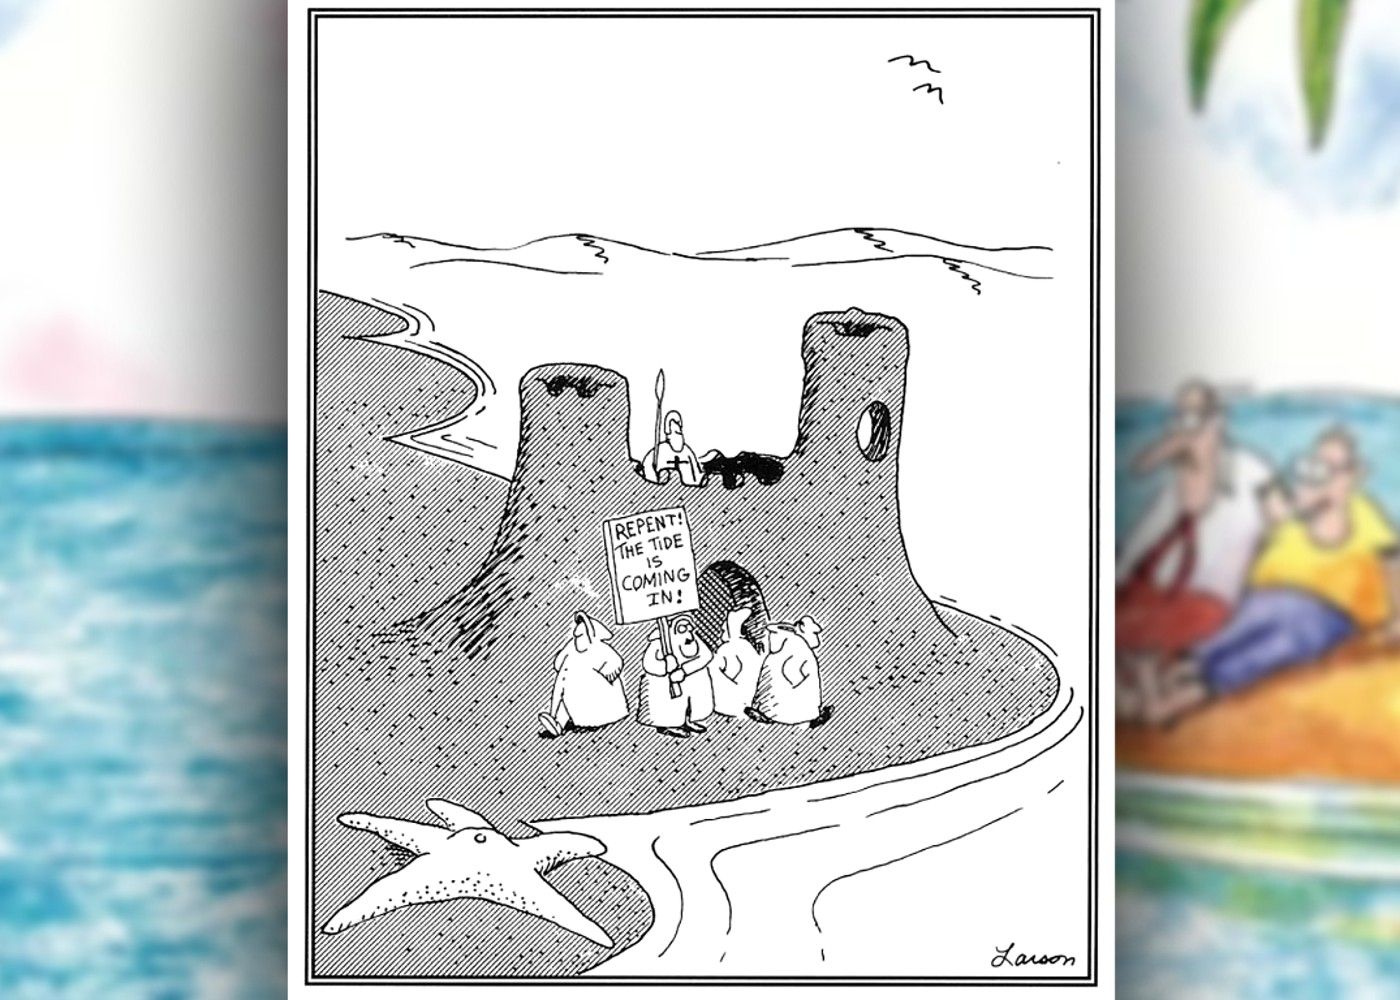 far side comic where tiny people live in a sandcastle